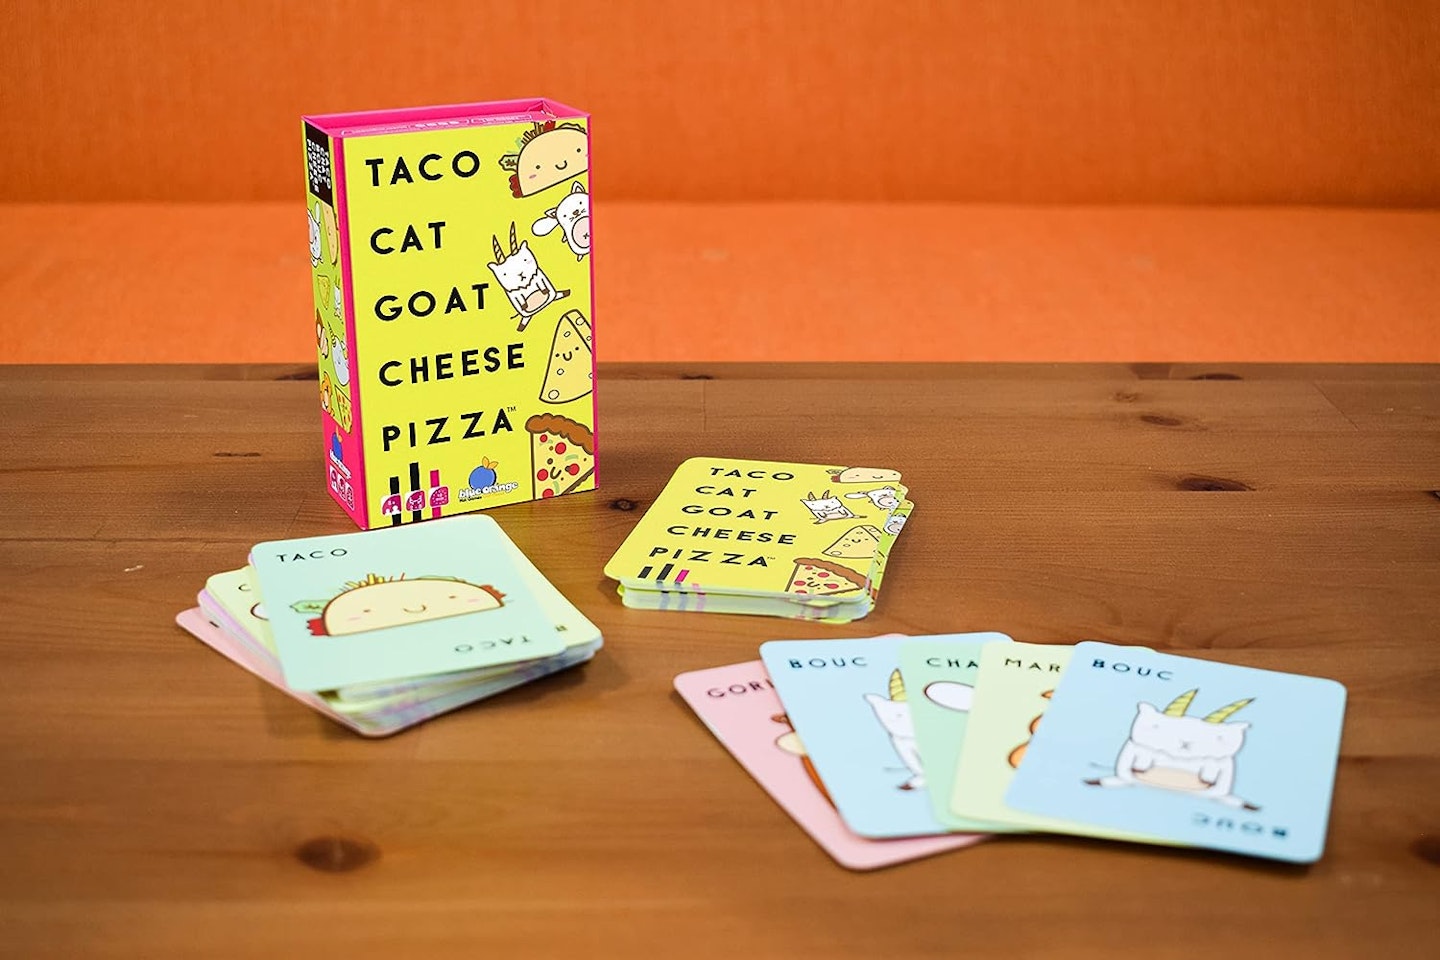 Taco Cat Goat Cheese Pizza game box and contents